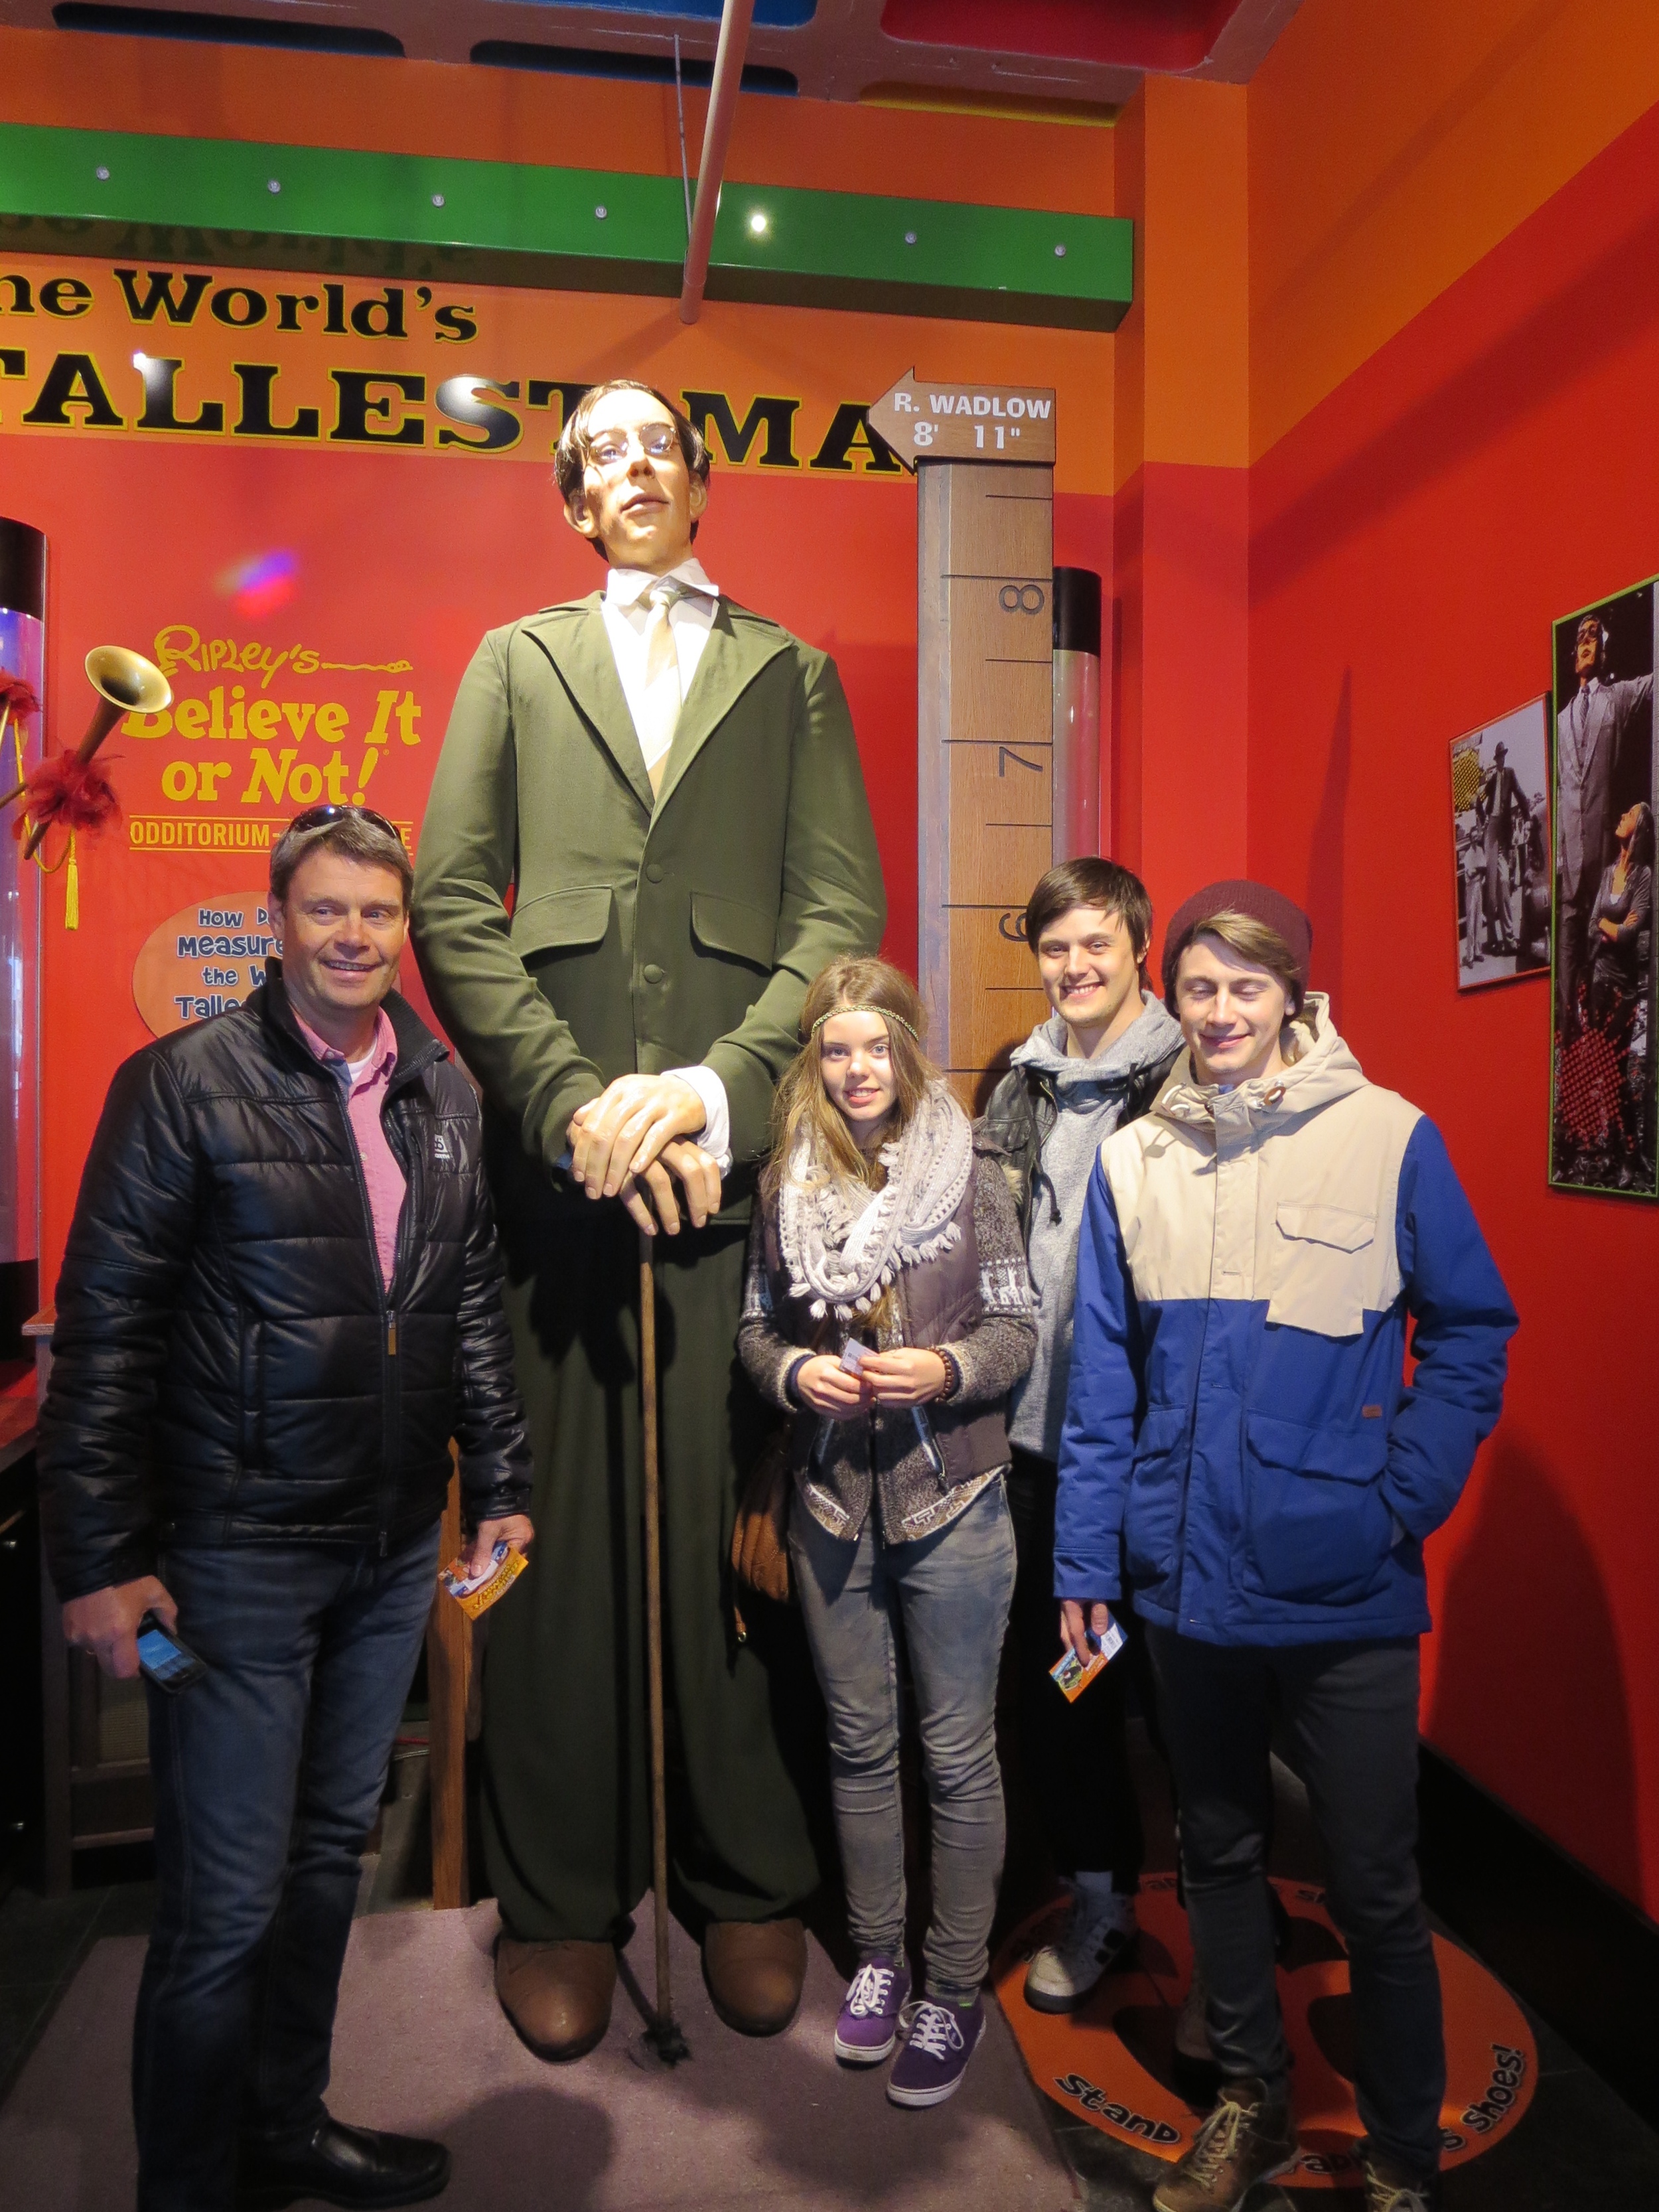 At Ripley´s museum we found the world´s largest man